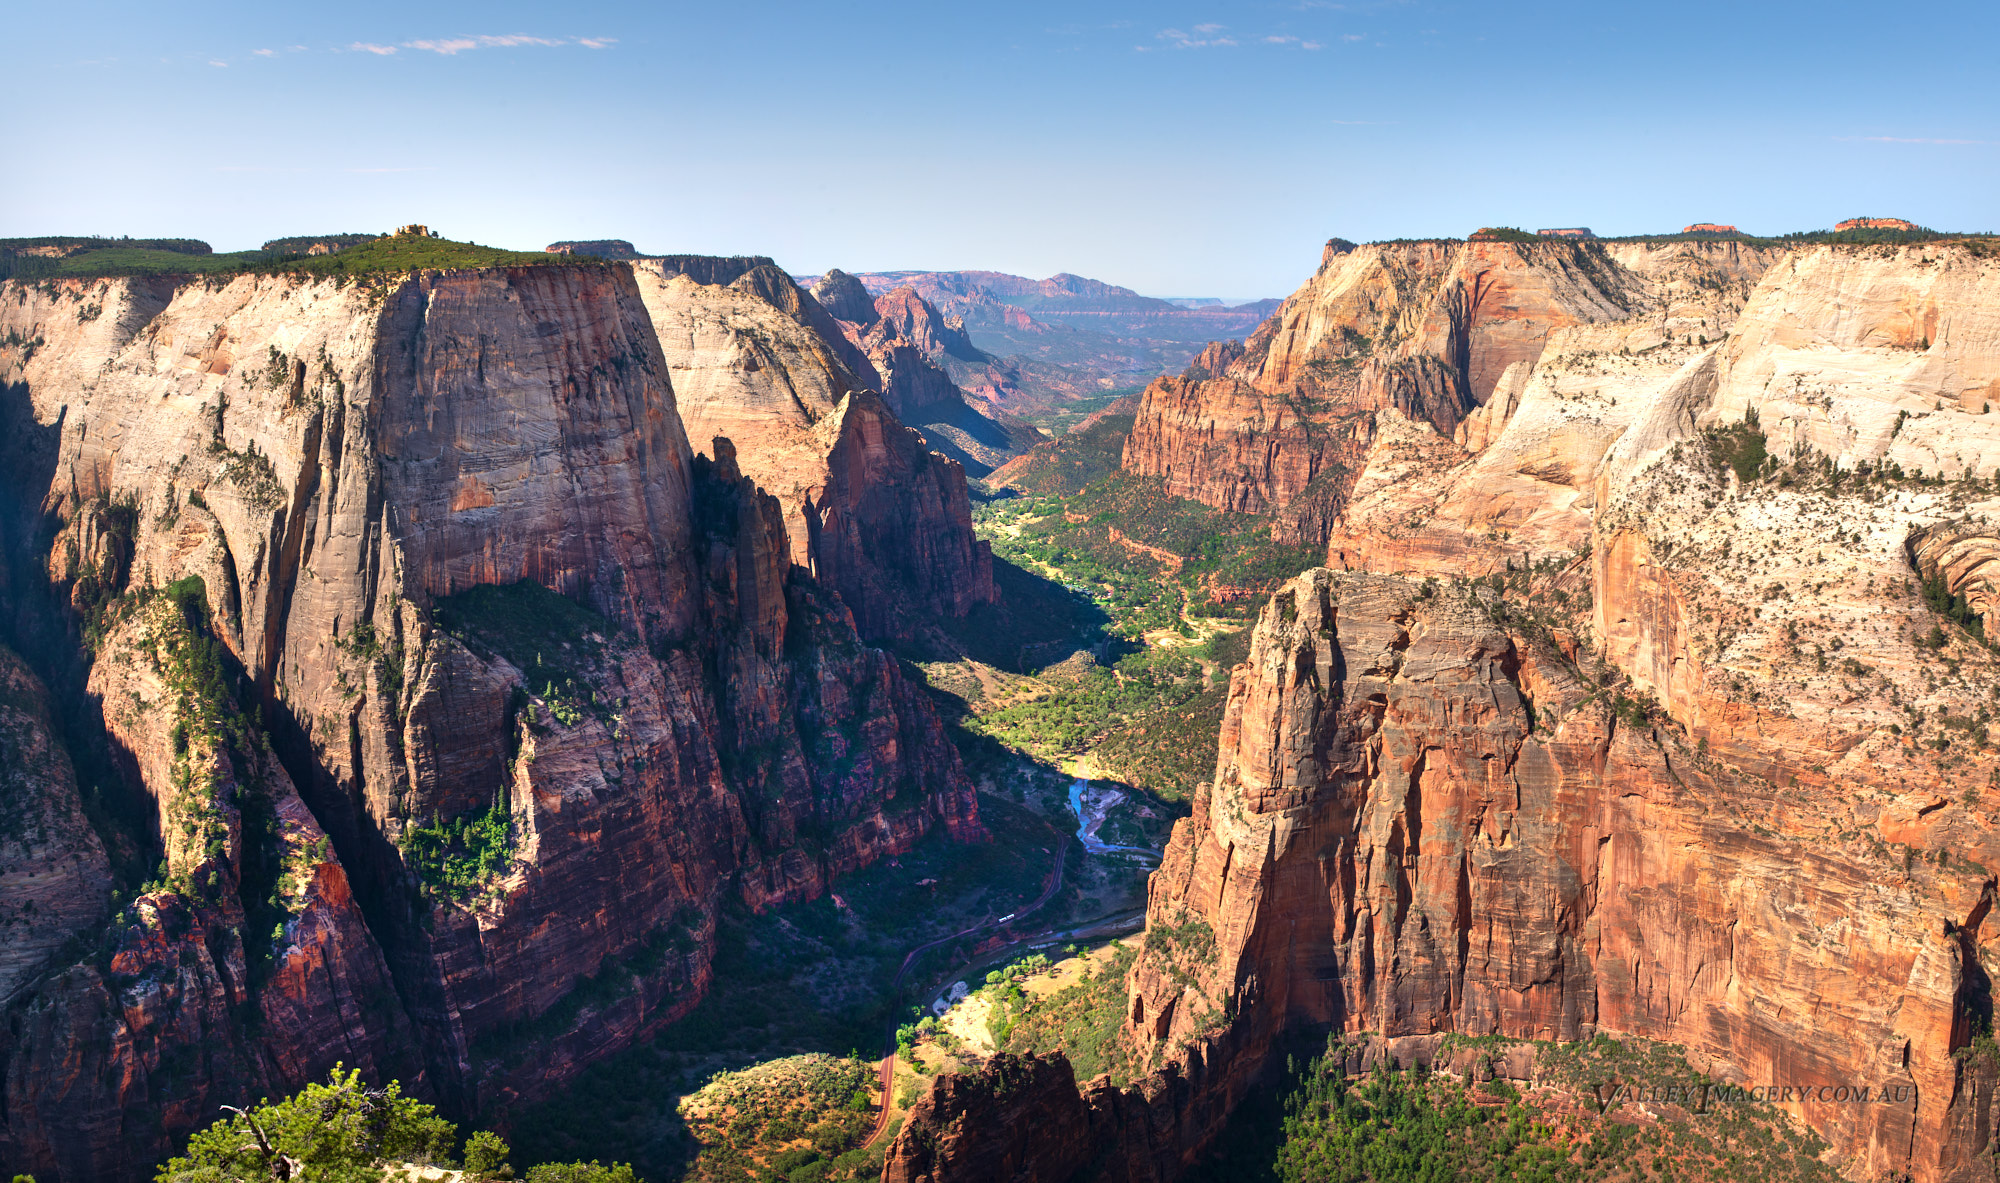 Observation Point lookout in Zion National Park, Utah, USA